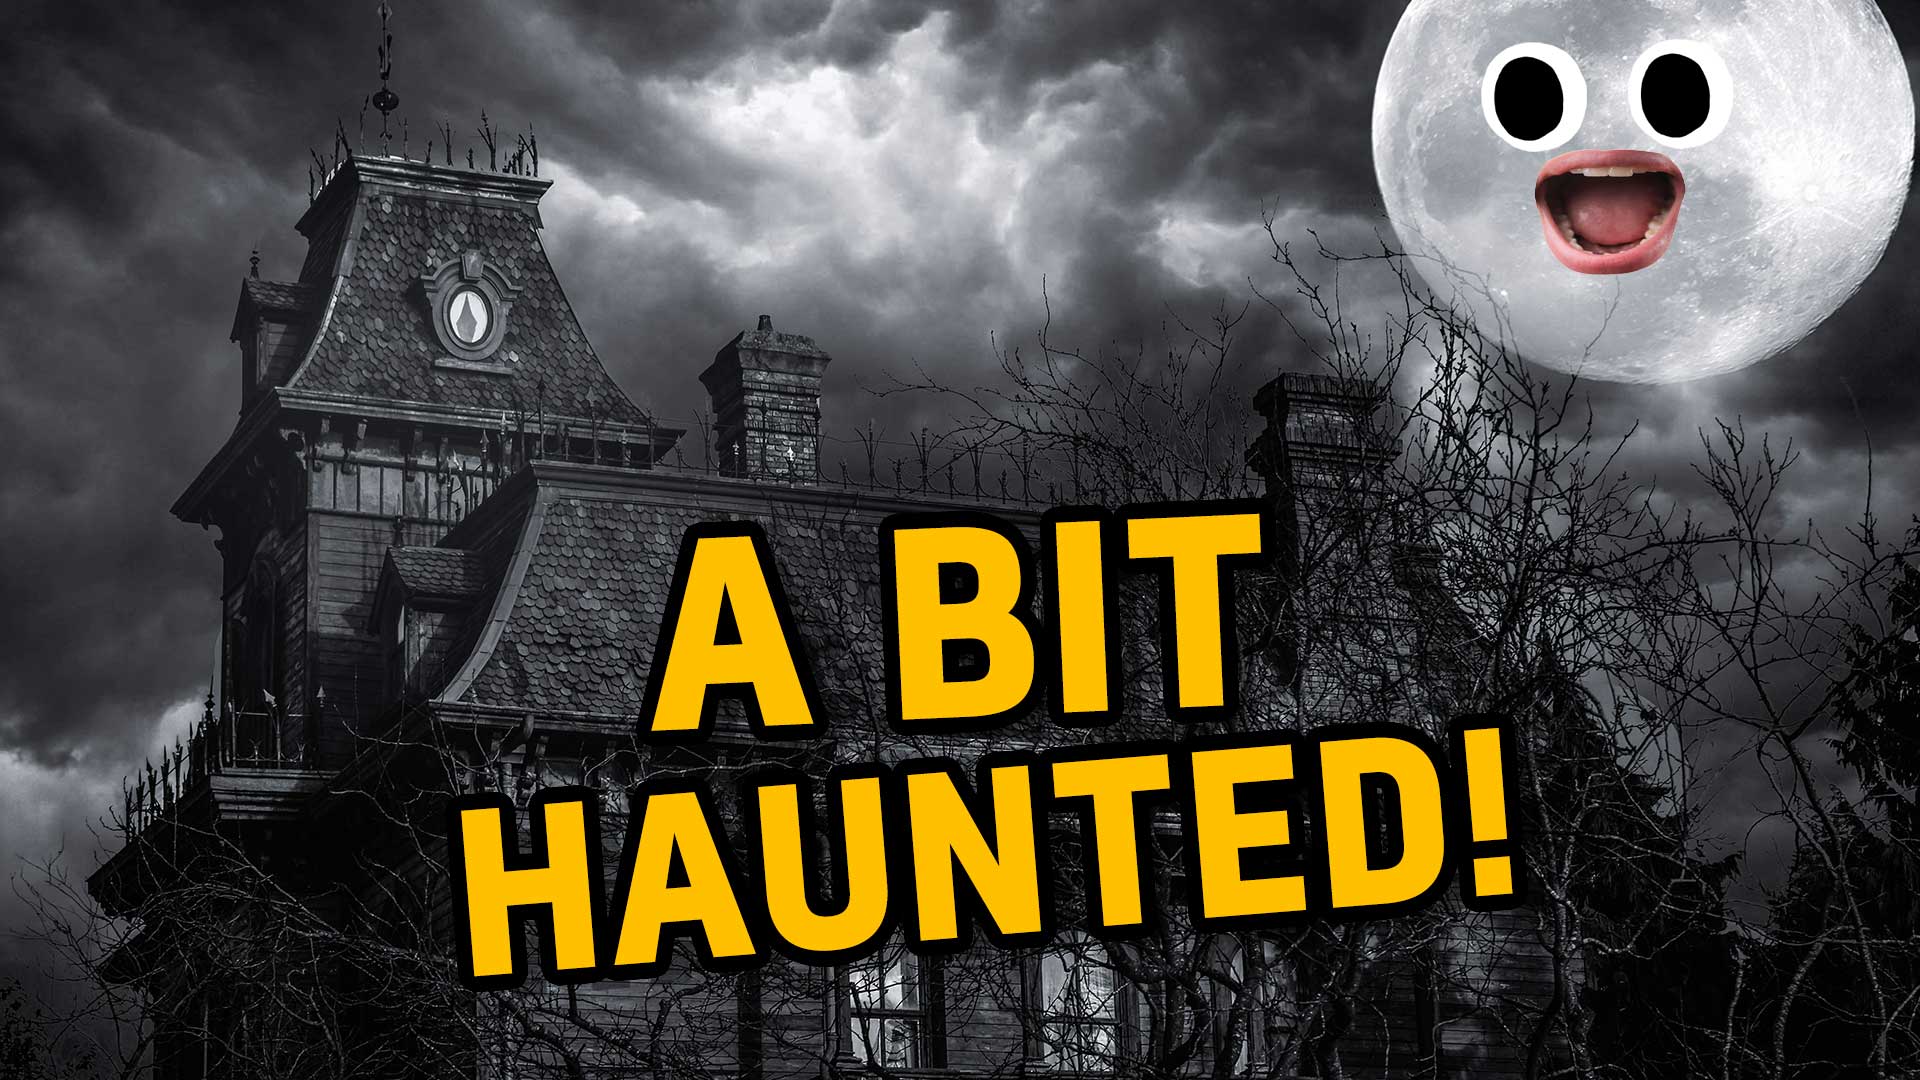 Your house is: A BIT HAUNTED!